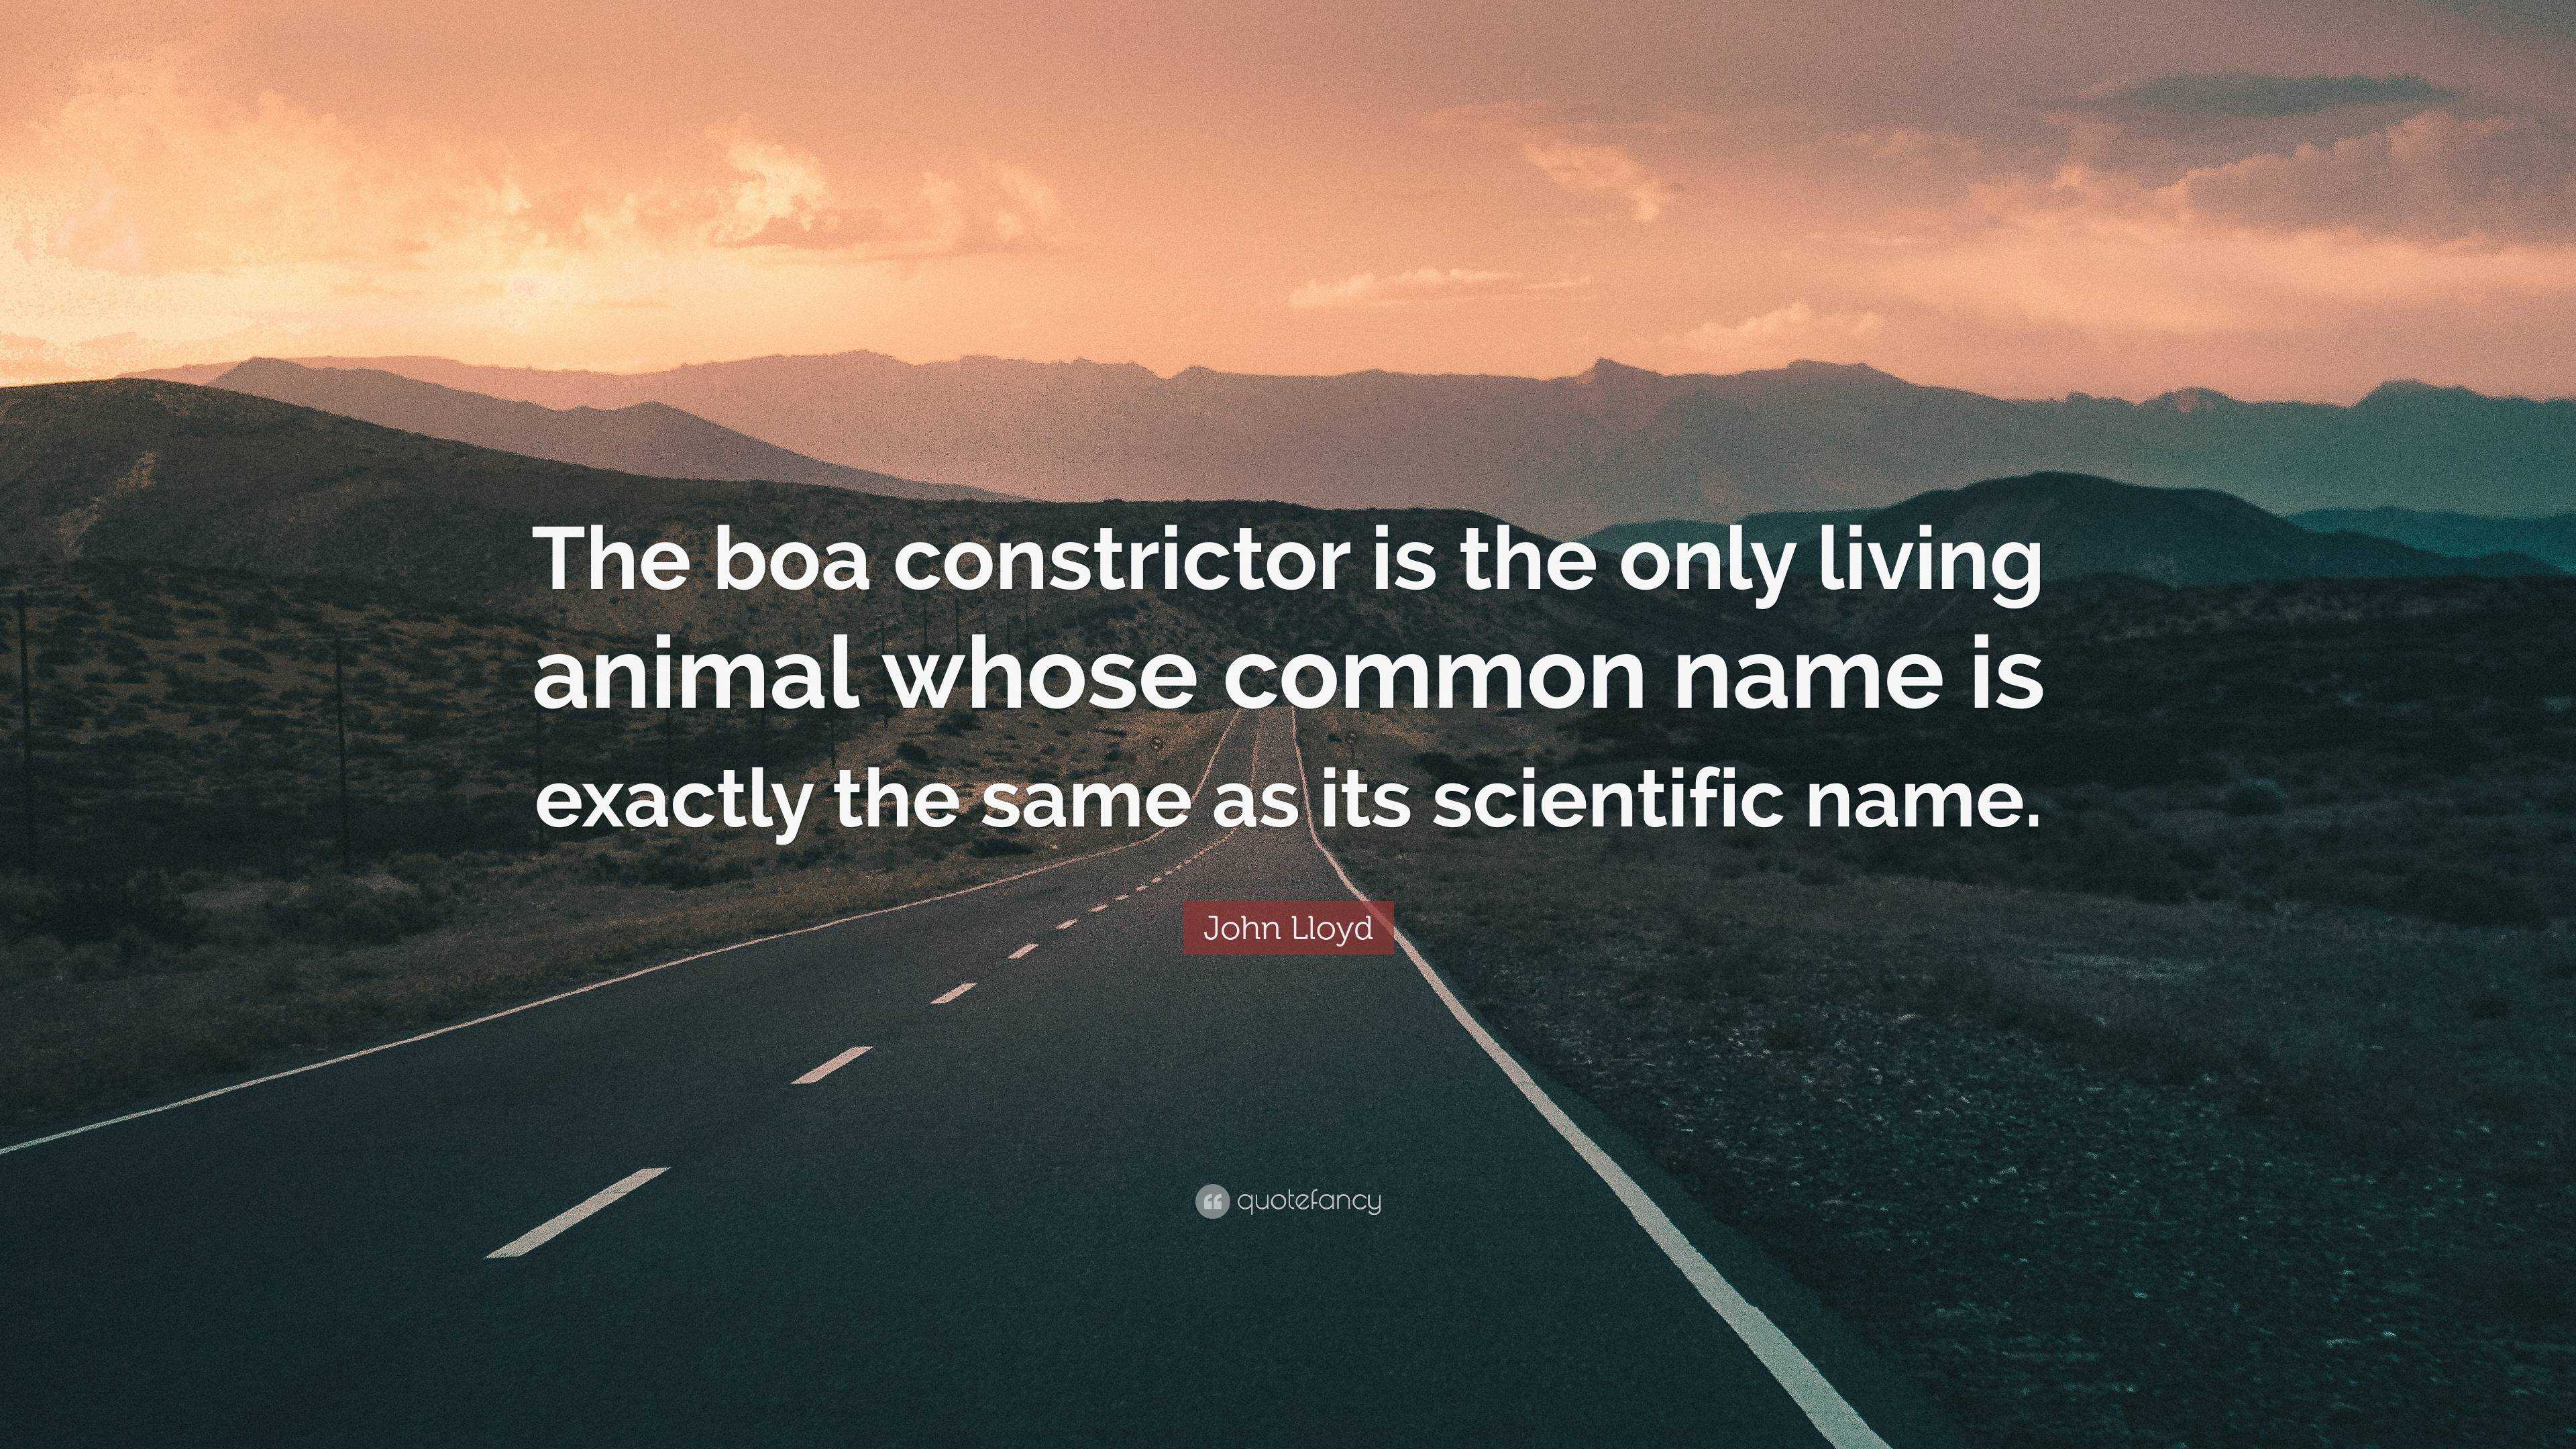 John Lloyd Quote: “The boa constrictor is the only living animal whose common  name is exactly